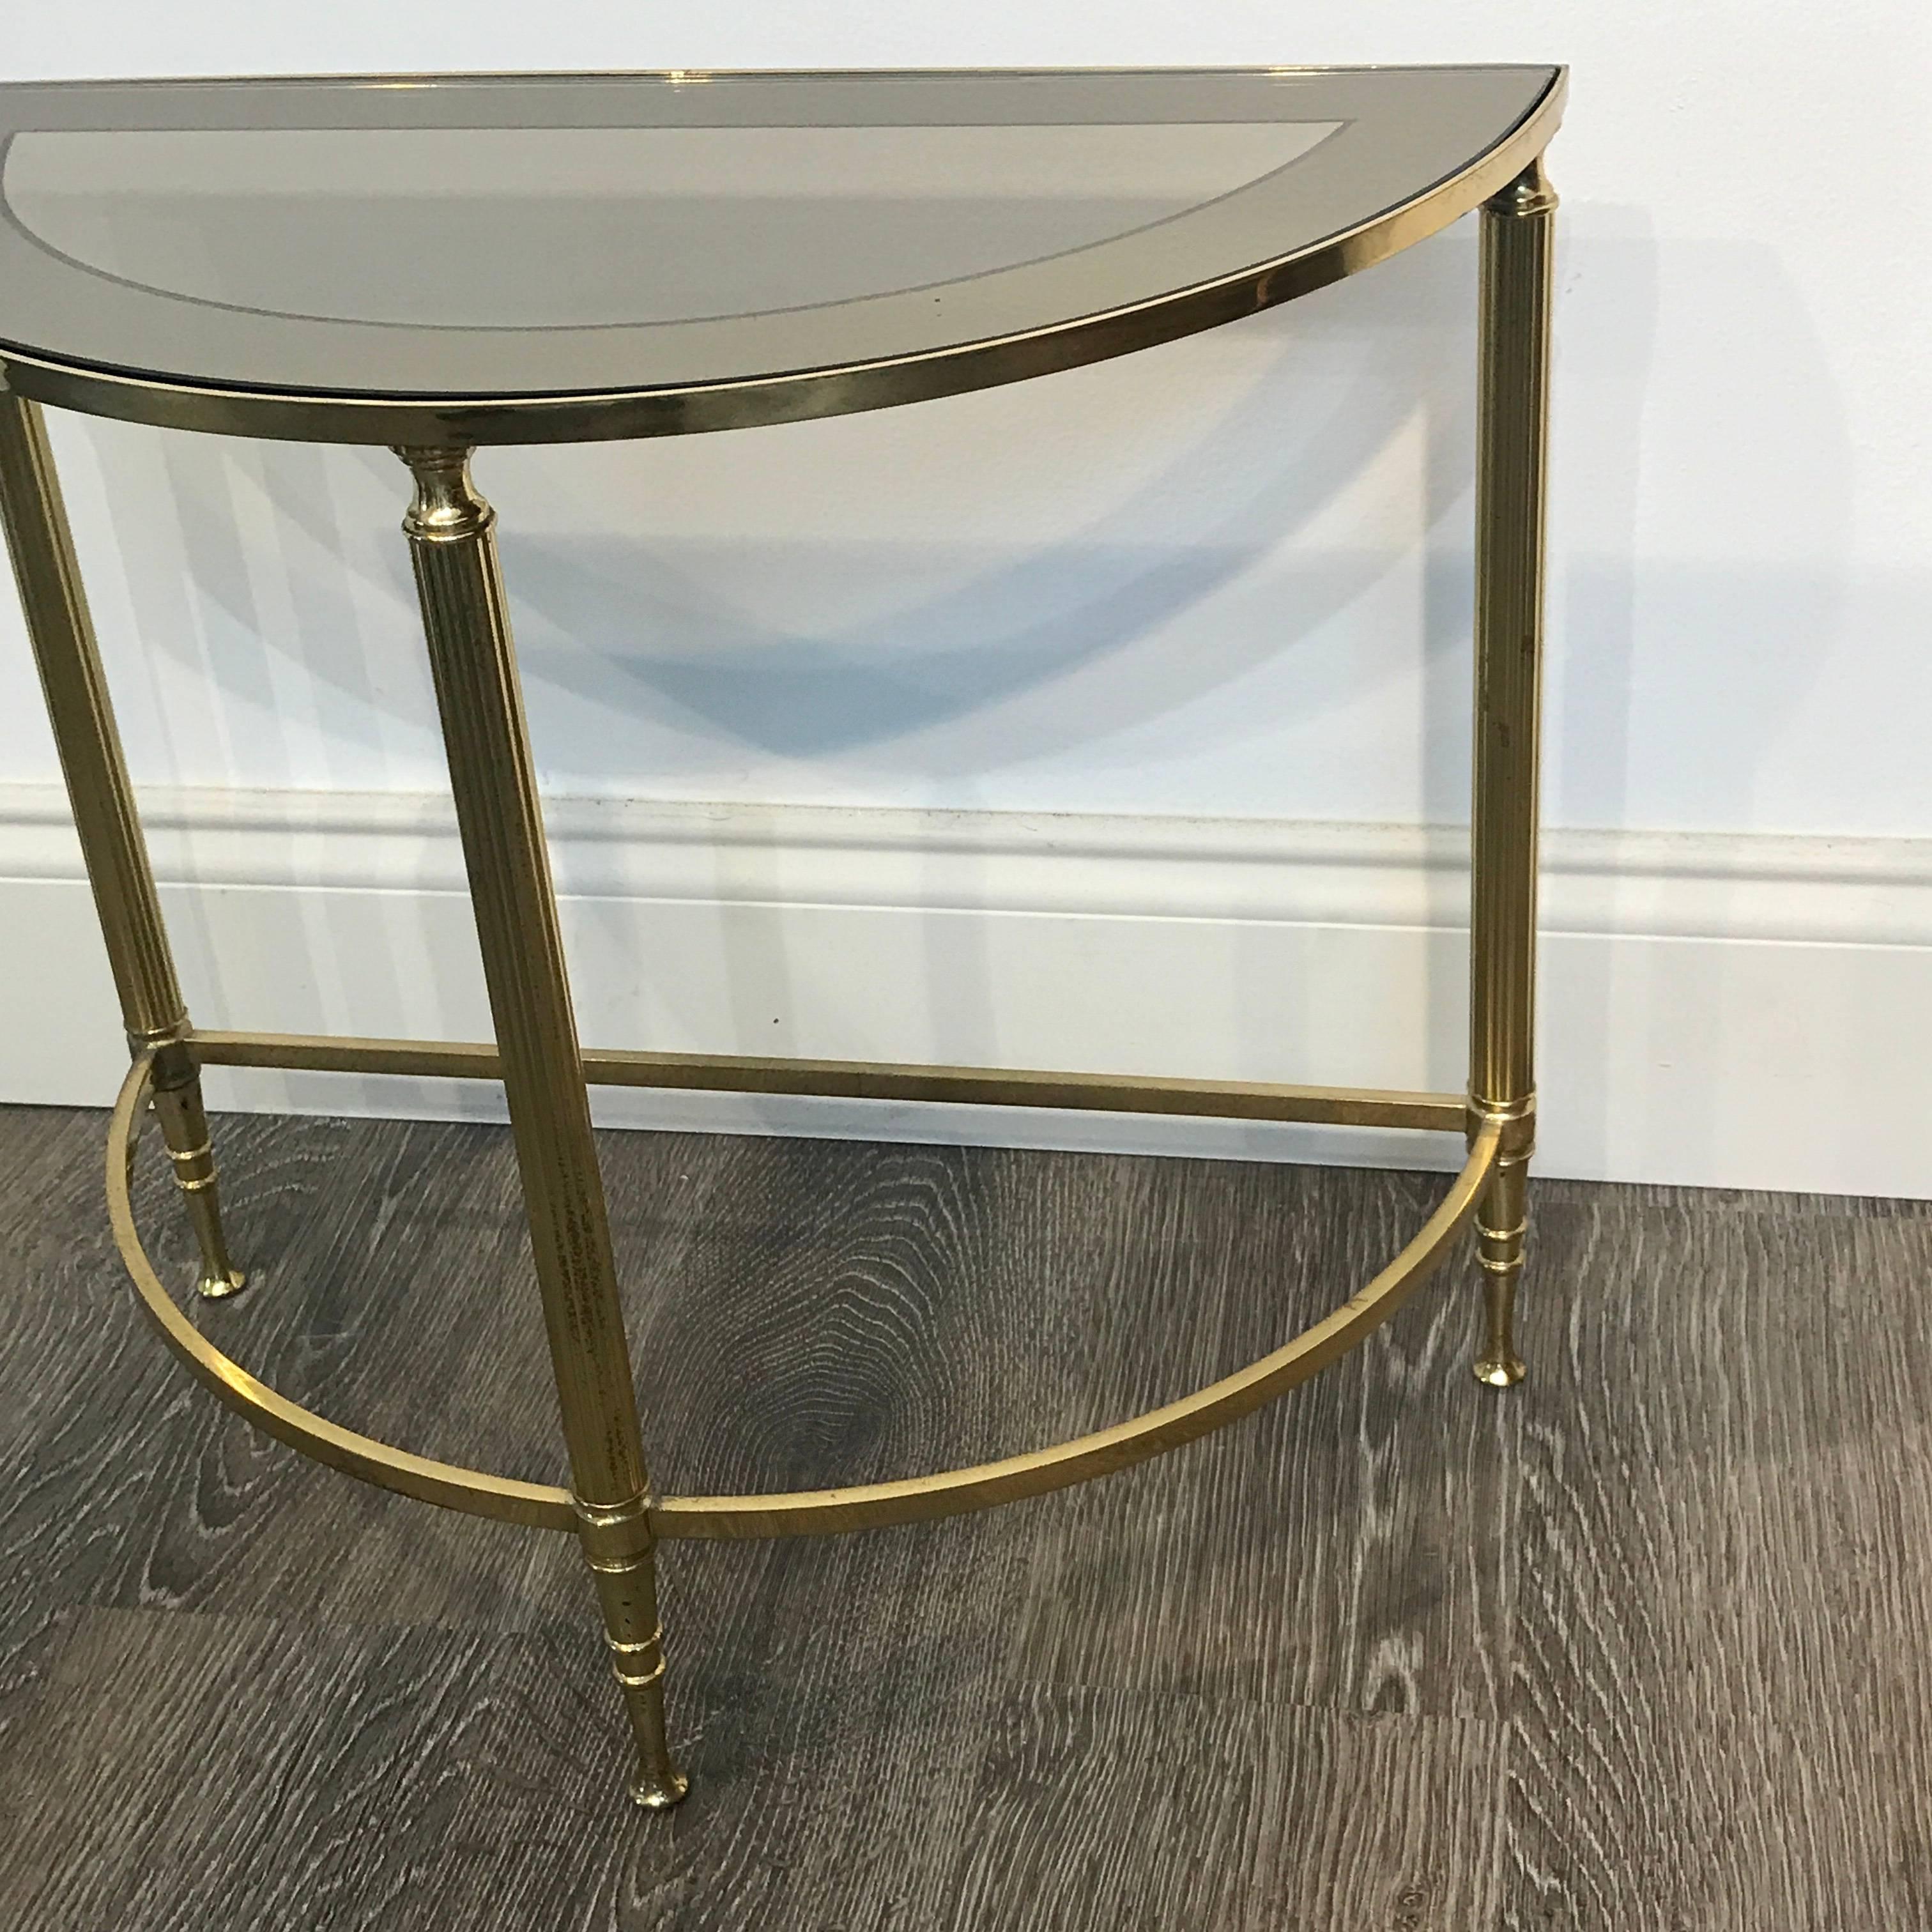 Diminutive Maison Jansen style brass demilune drinks/side table, with removable mirror surround clear glass inset panel.
